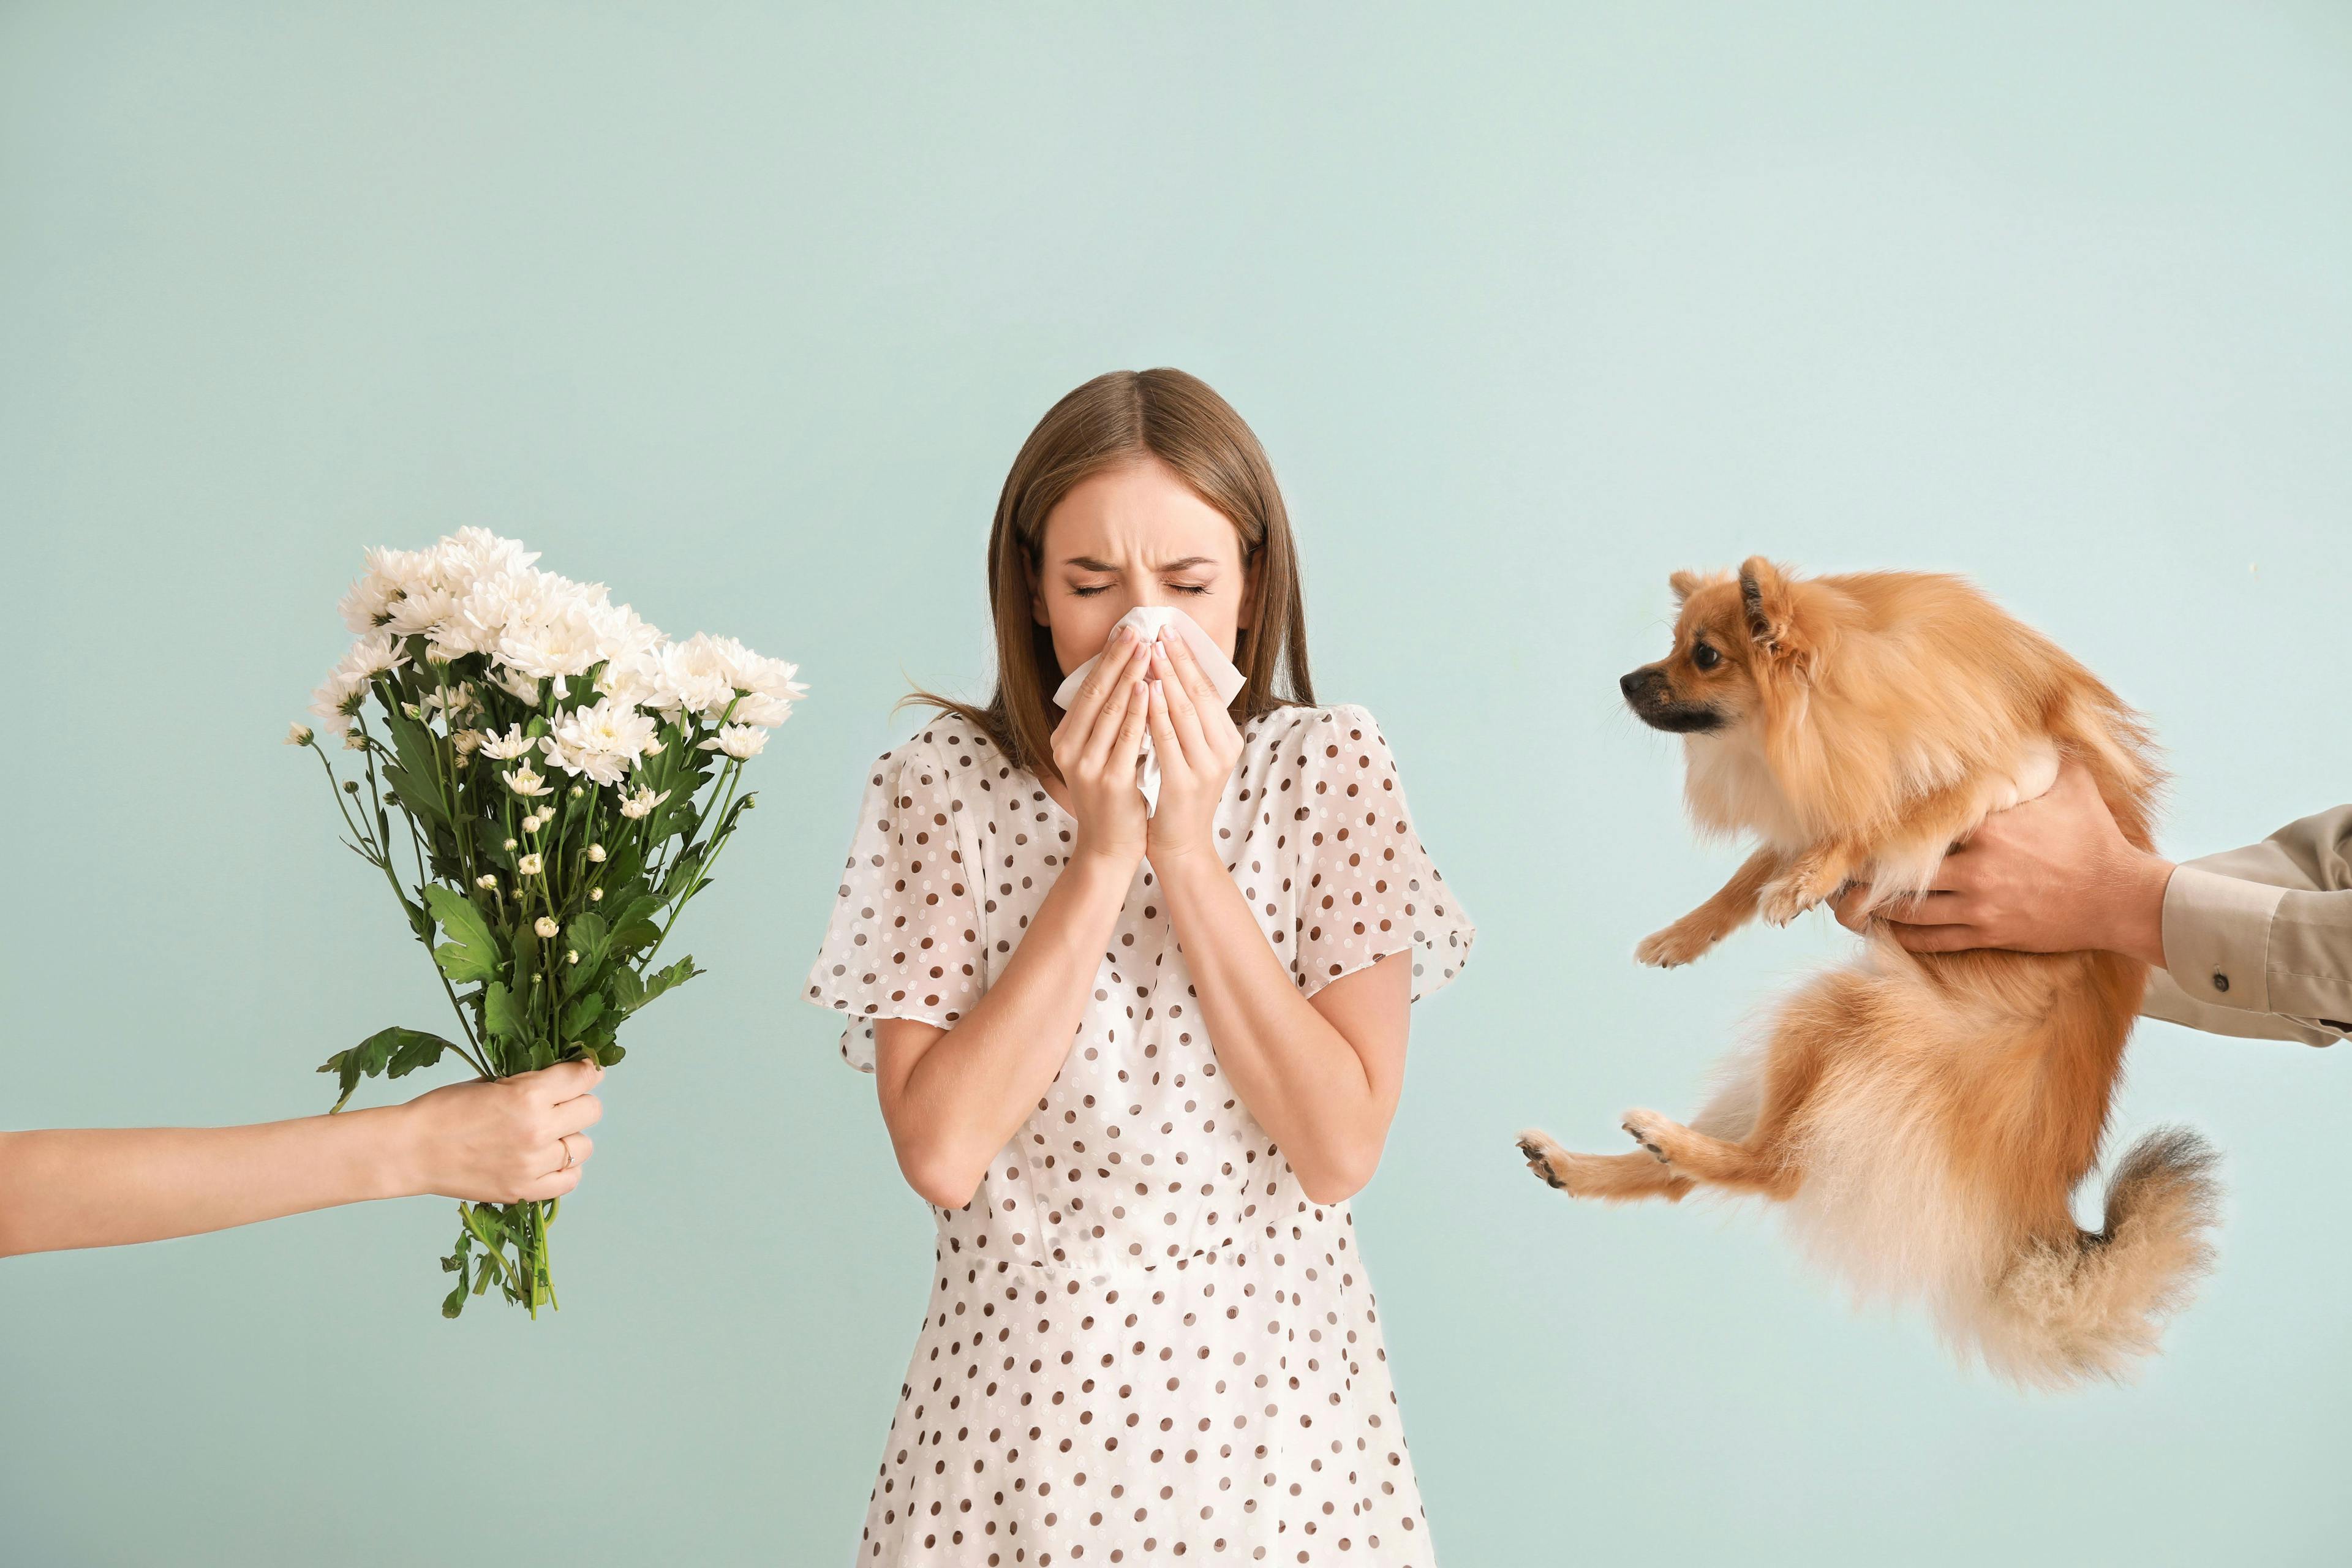 People giving flowers and dog to young woman suffering from allergy on light background | Image Credit: Pixel-Shot - stock.adobe.com